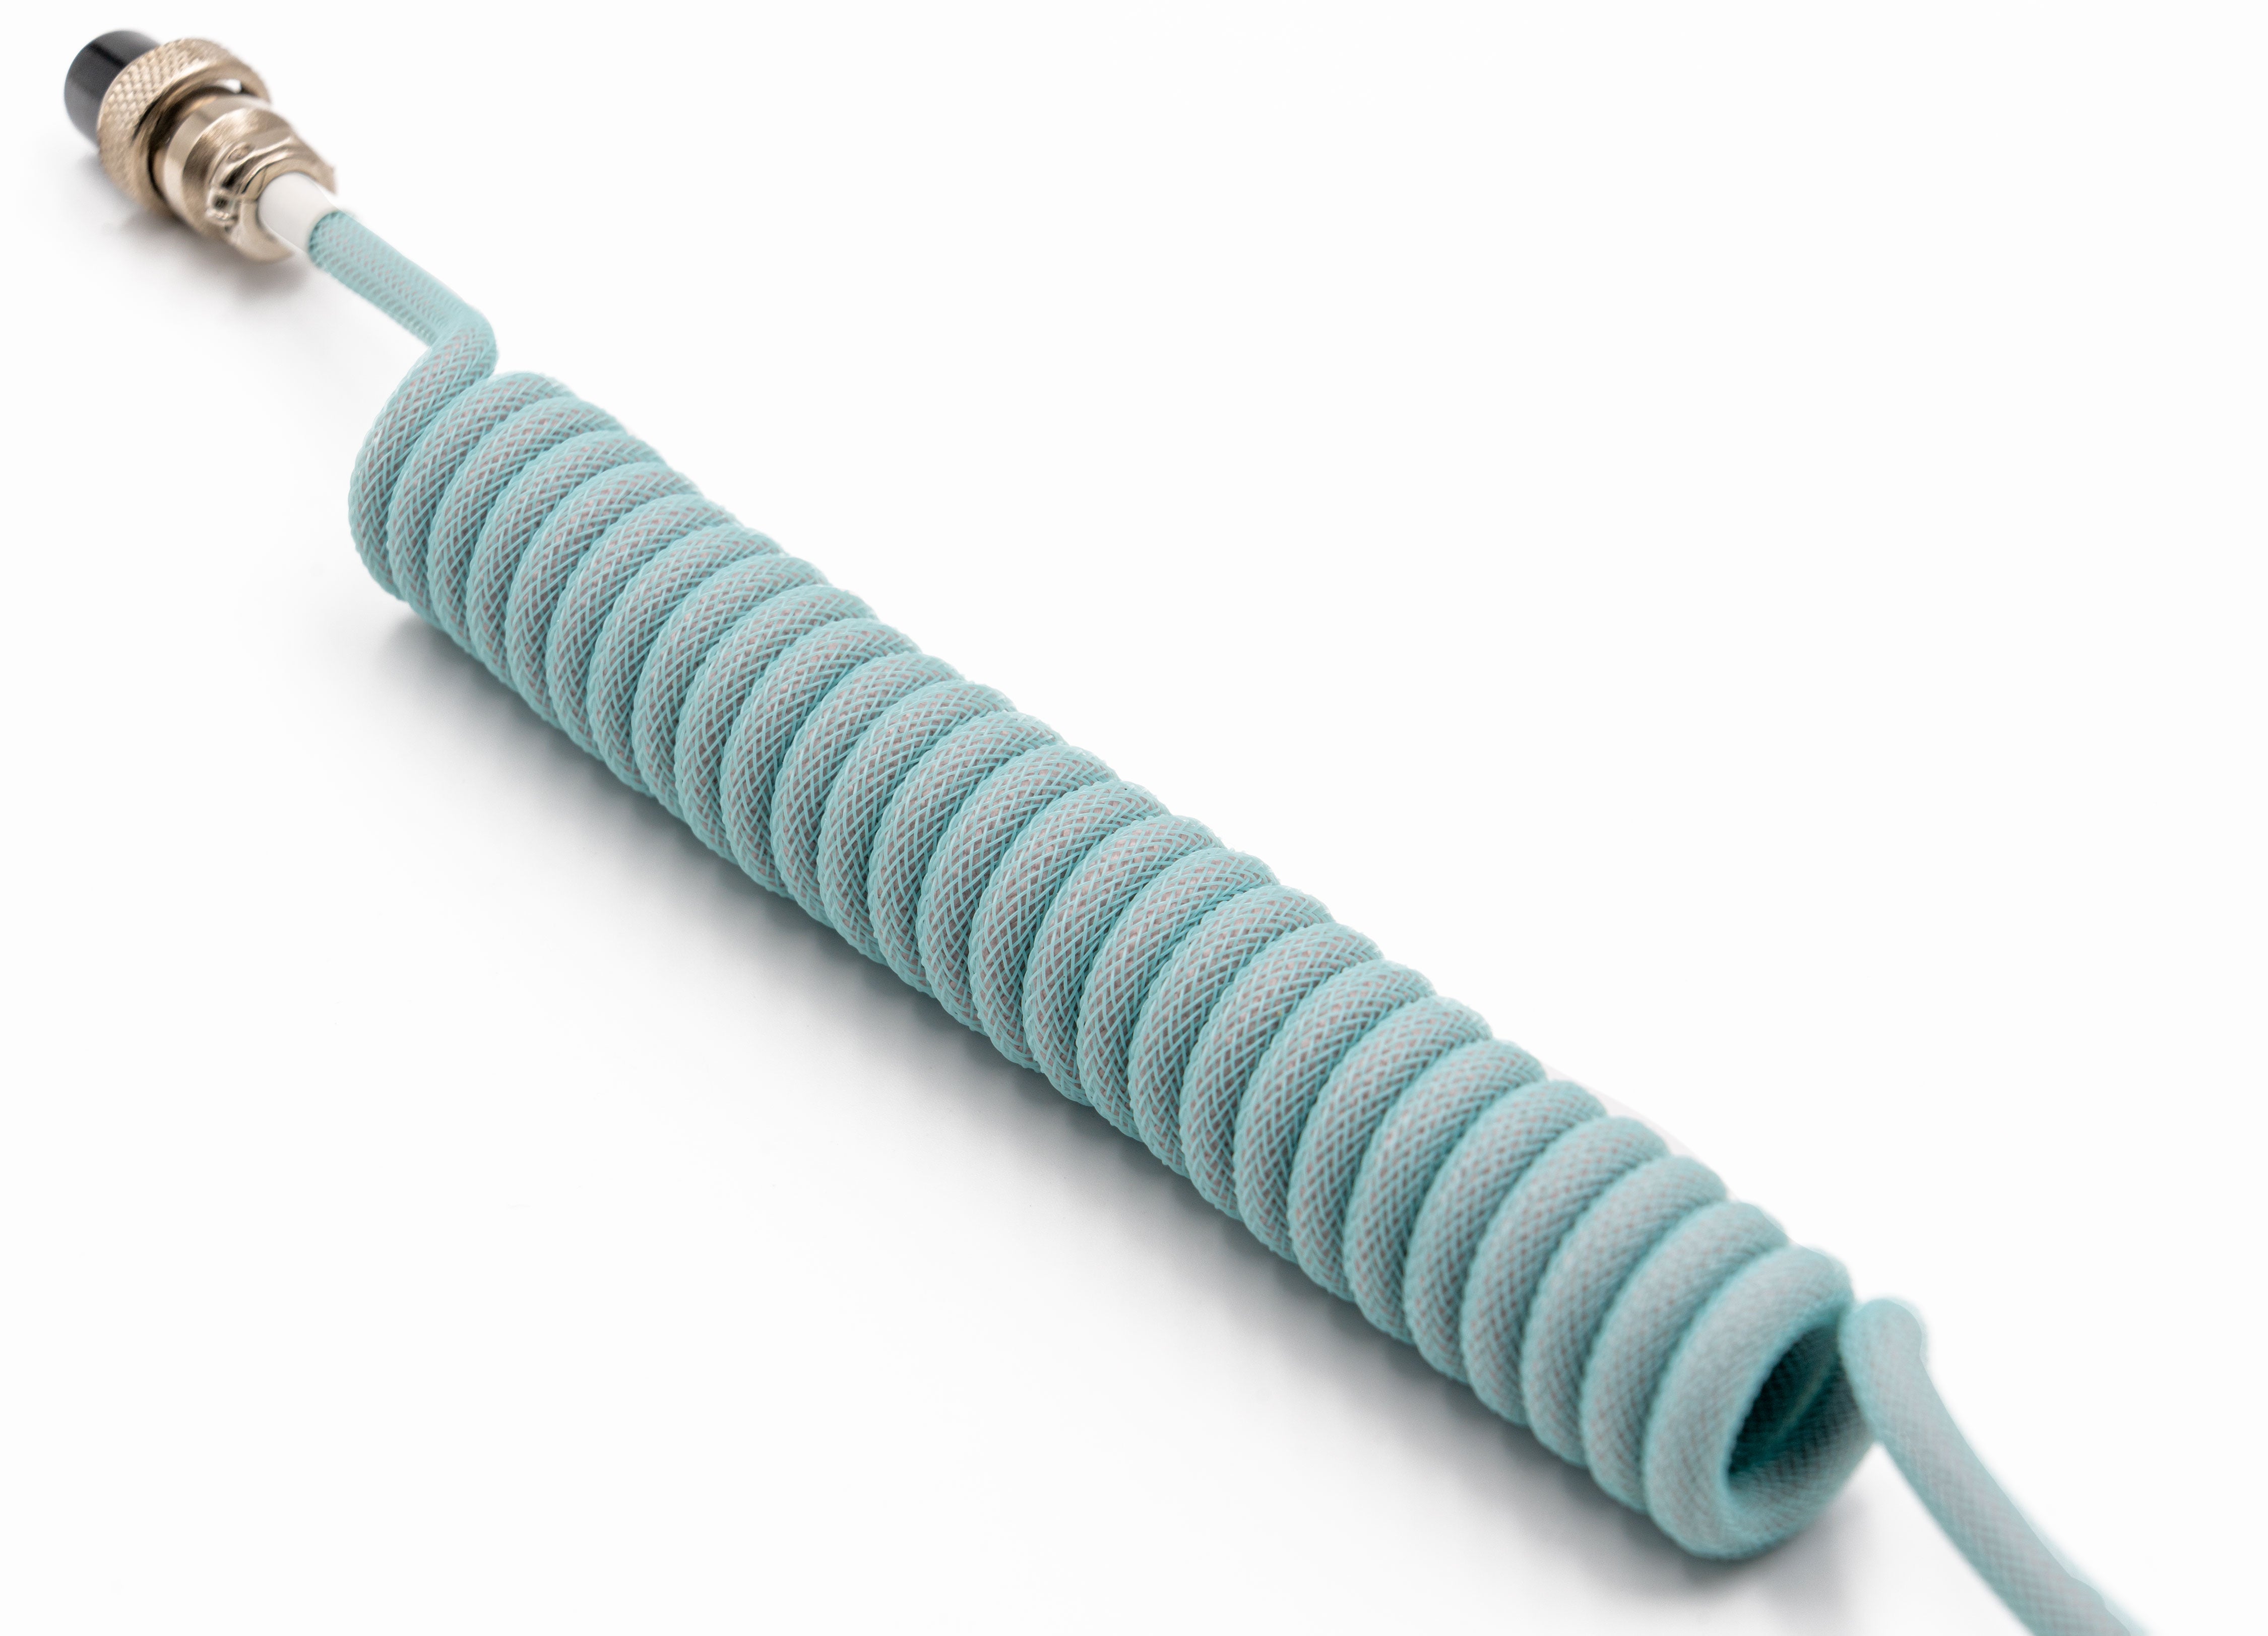 Comfy Cable-Space Cables-coiled keyboard cable-coiled usb c cable-coiled cable keyboard